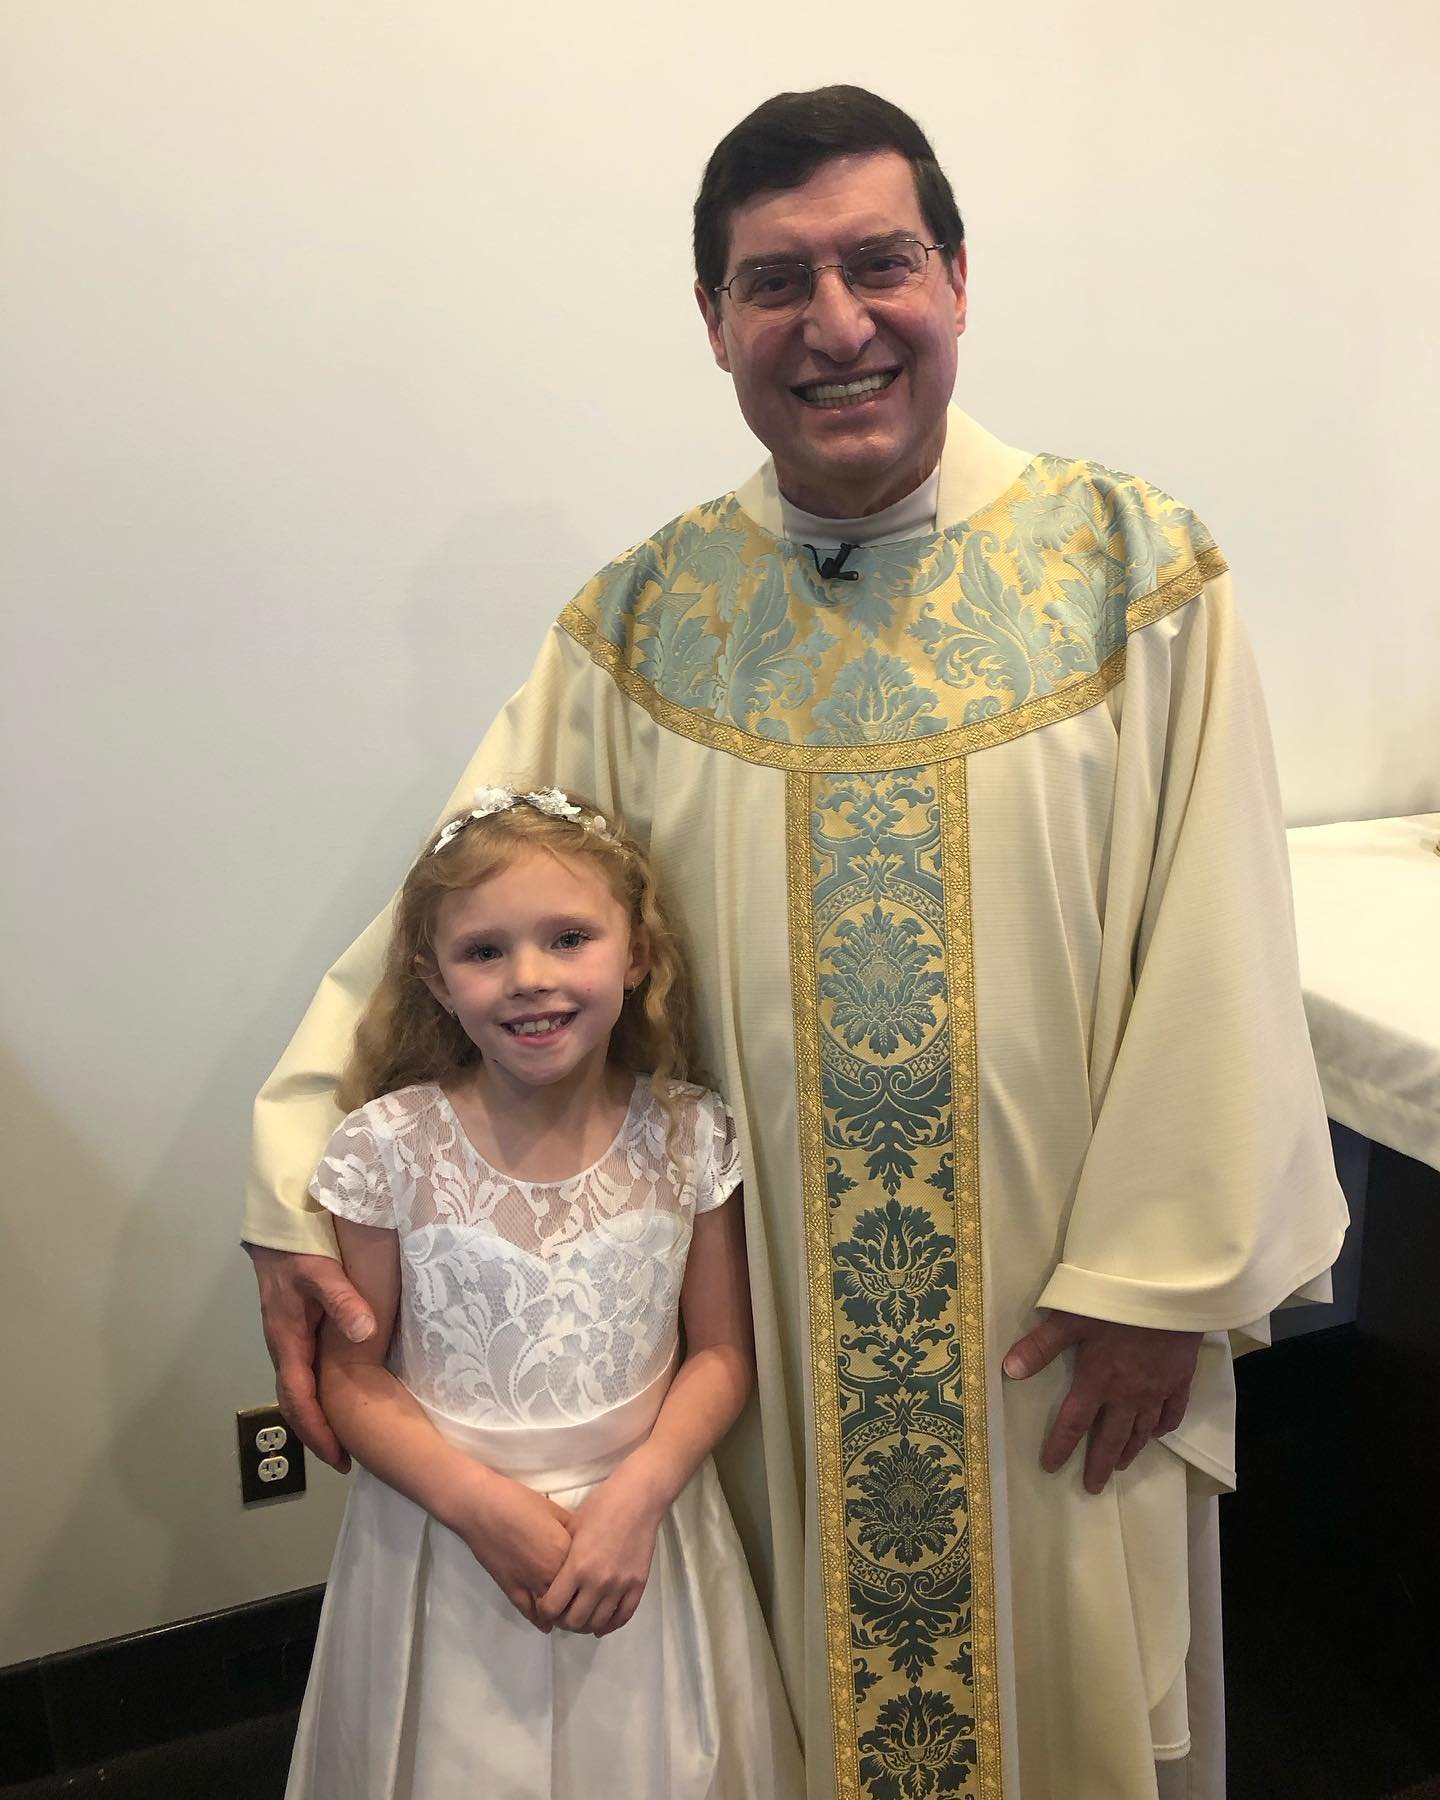 God bless Hailey on her first communion day!

#1stcommunion #godbless #holycommunion